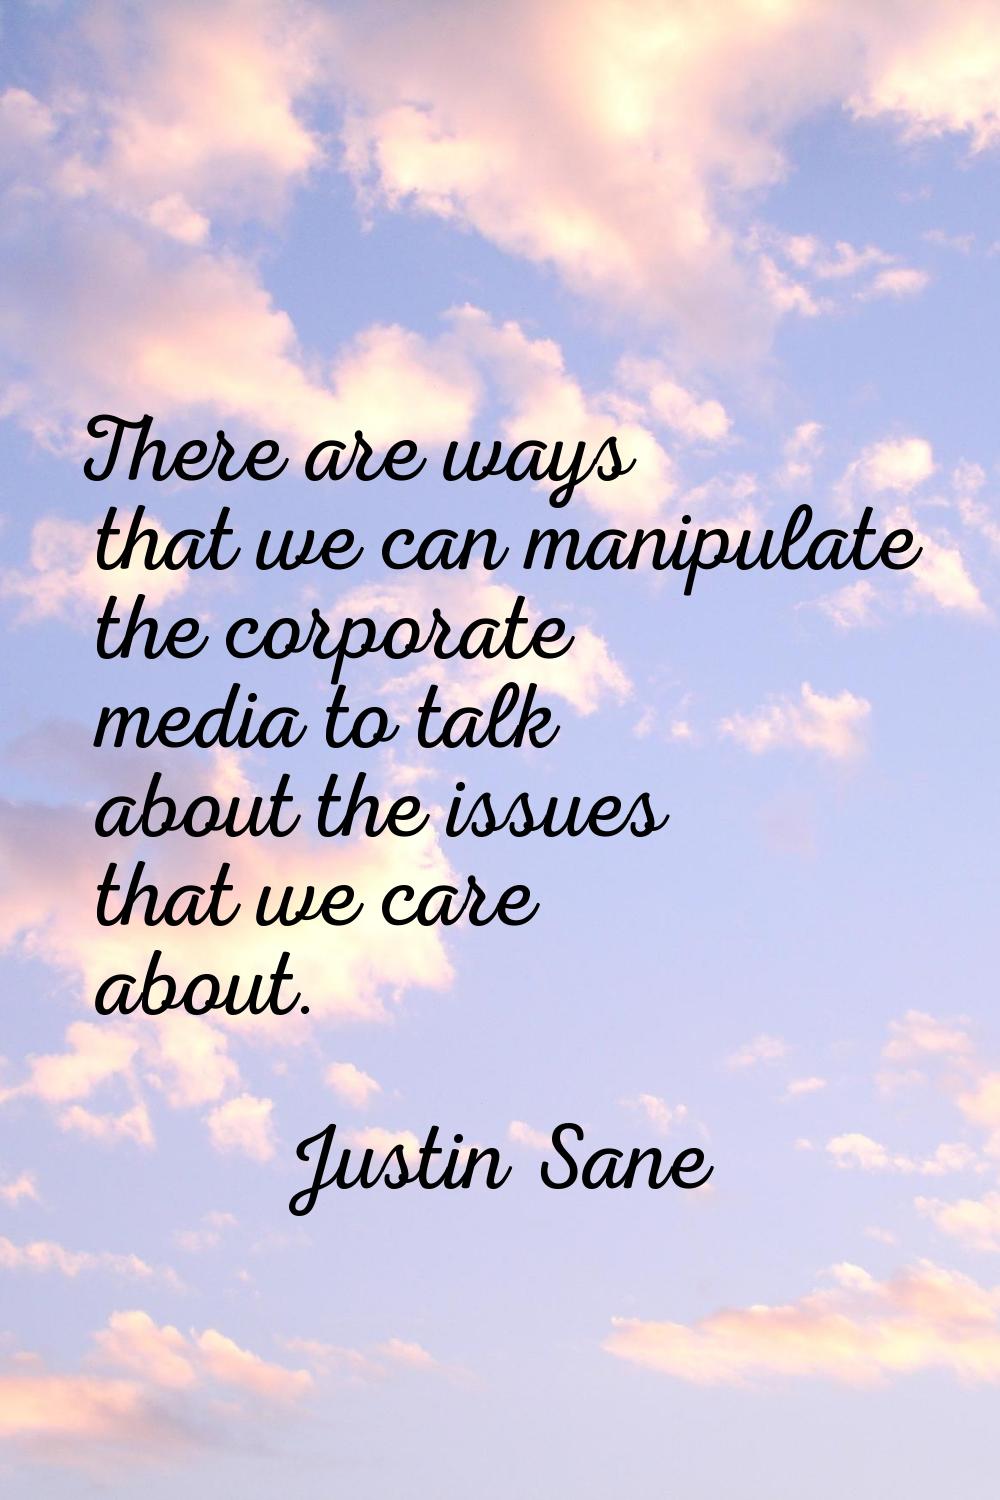 There are ways that we can manipulate the corporate media to talk about the issues that we care abo